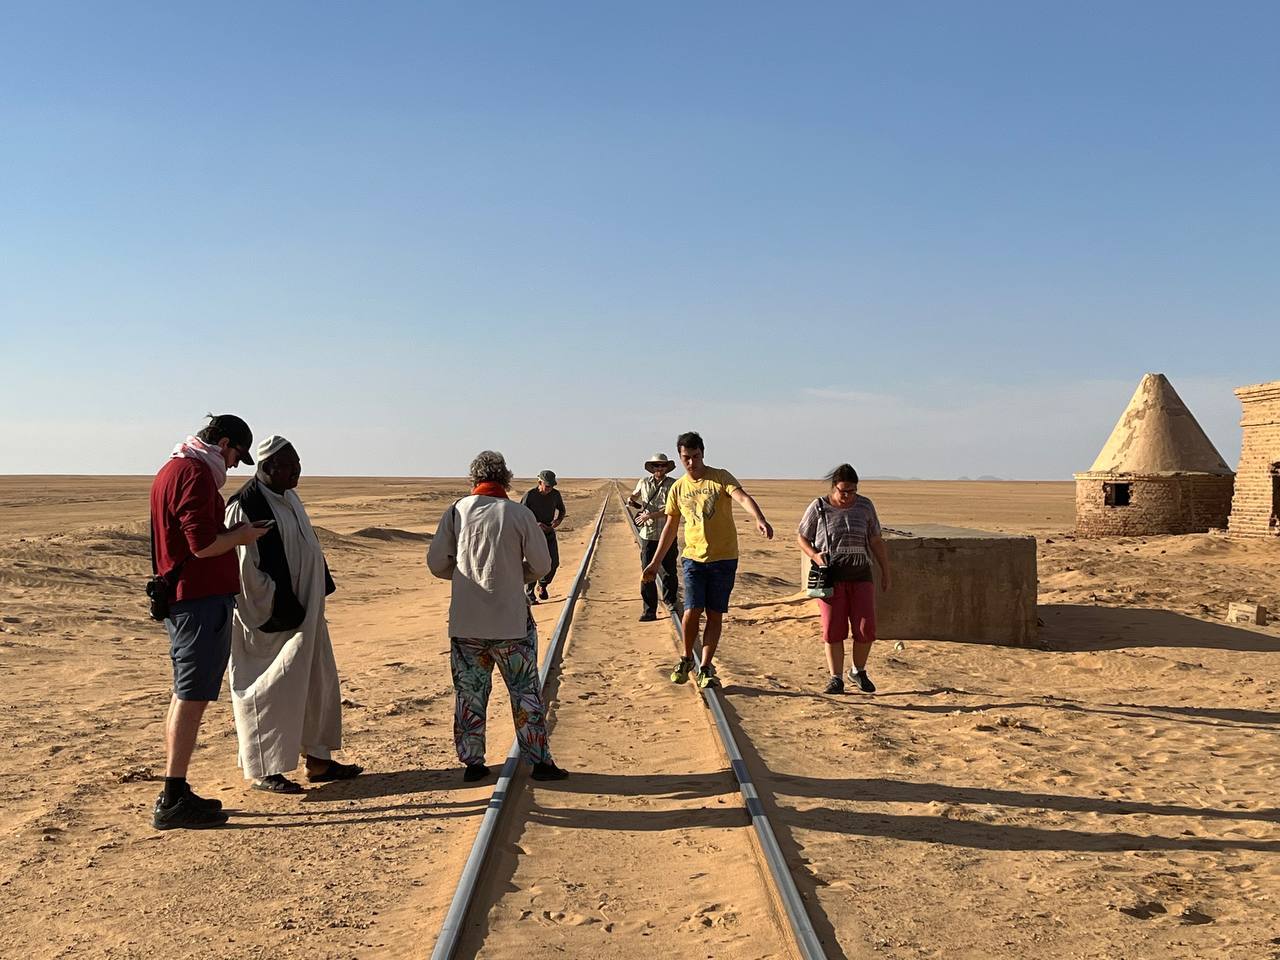 Ghostly Train Stations of Sudan